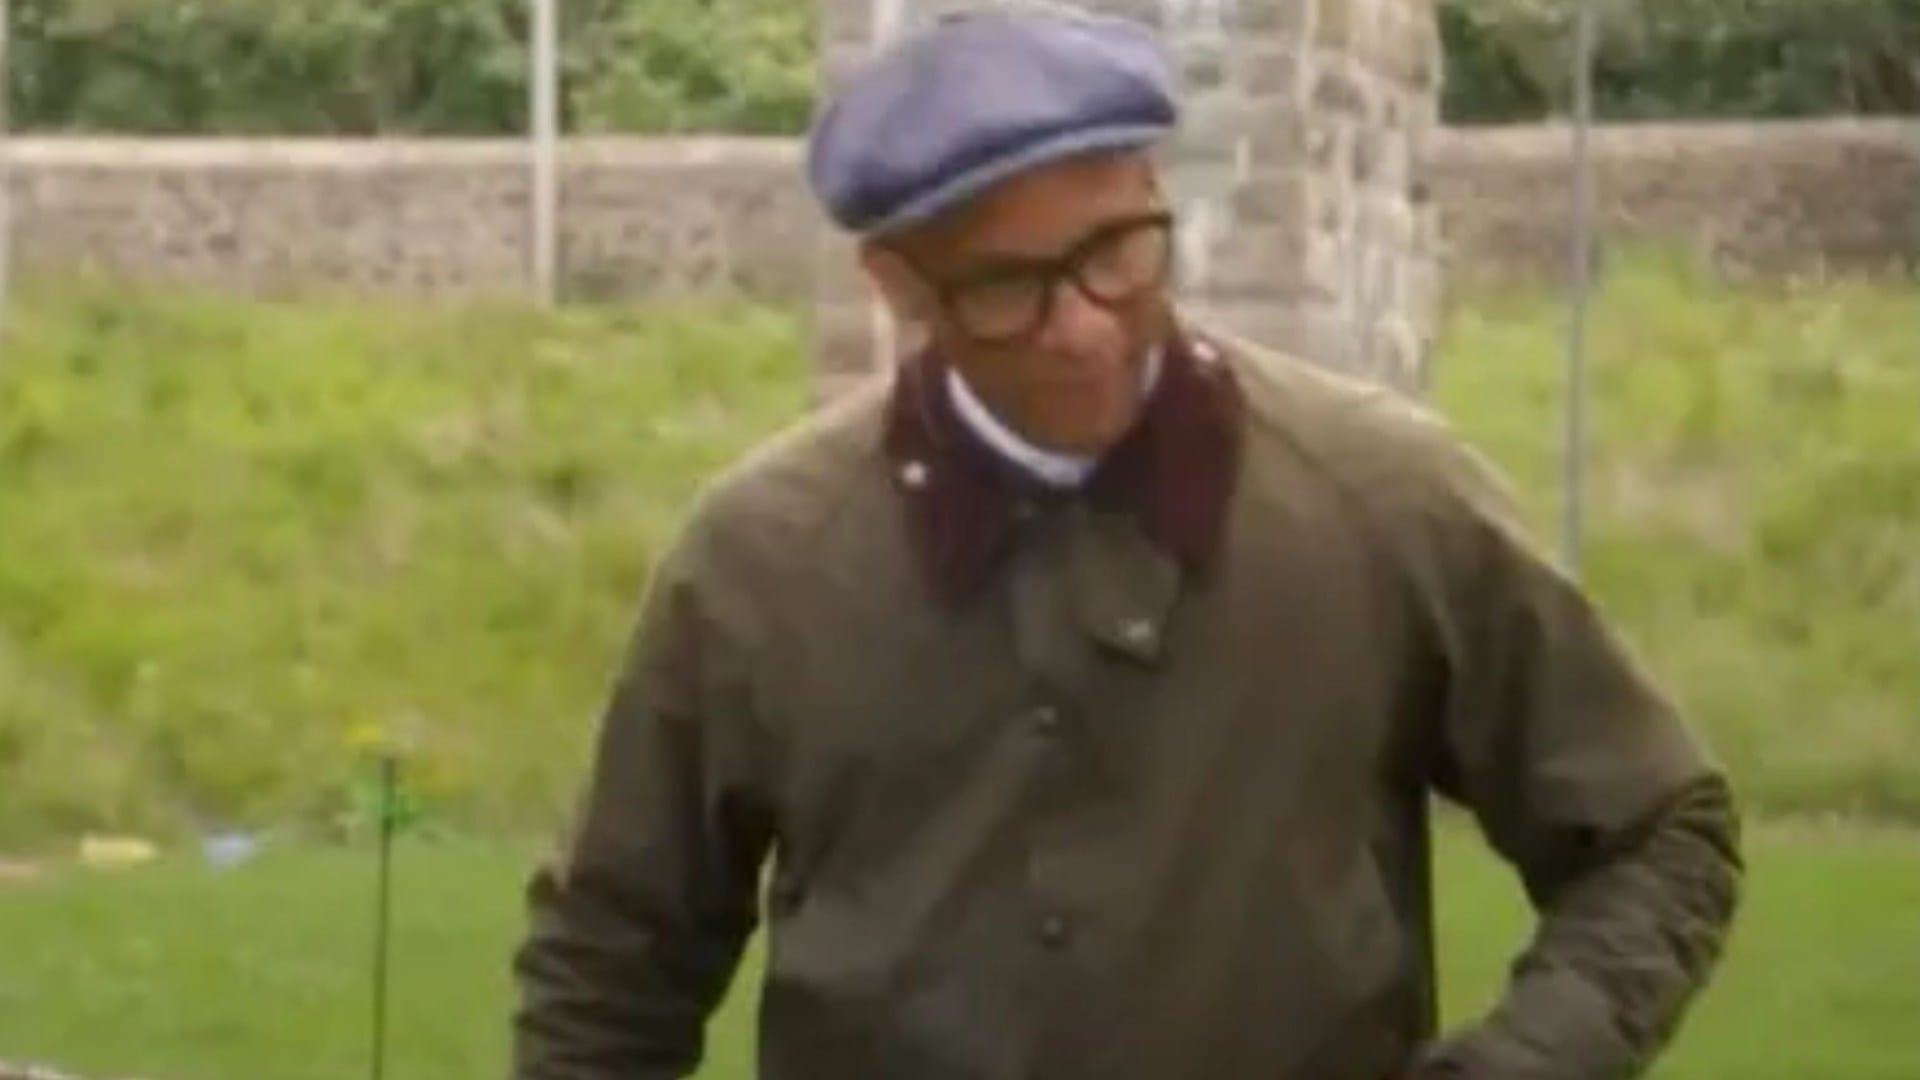 Sir David Jason stunned as Jay Blades tells him to 'do one' and storms off camera after string of digs on BBC series